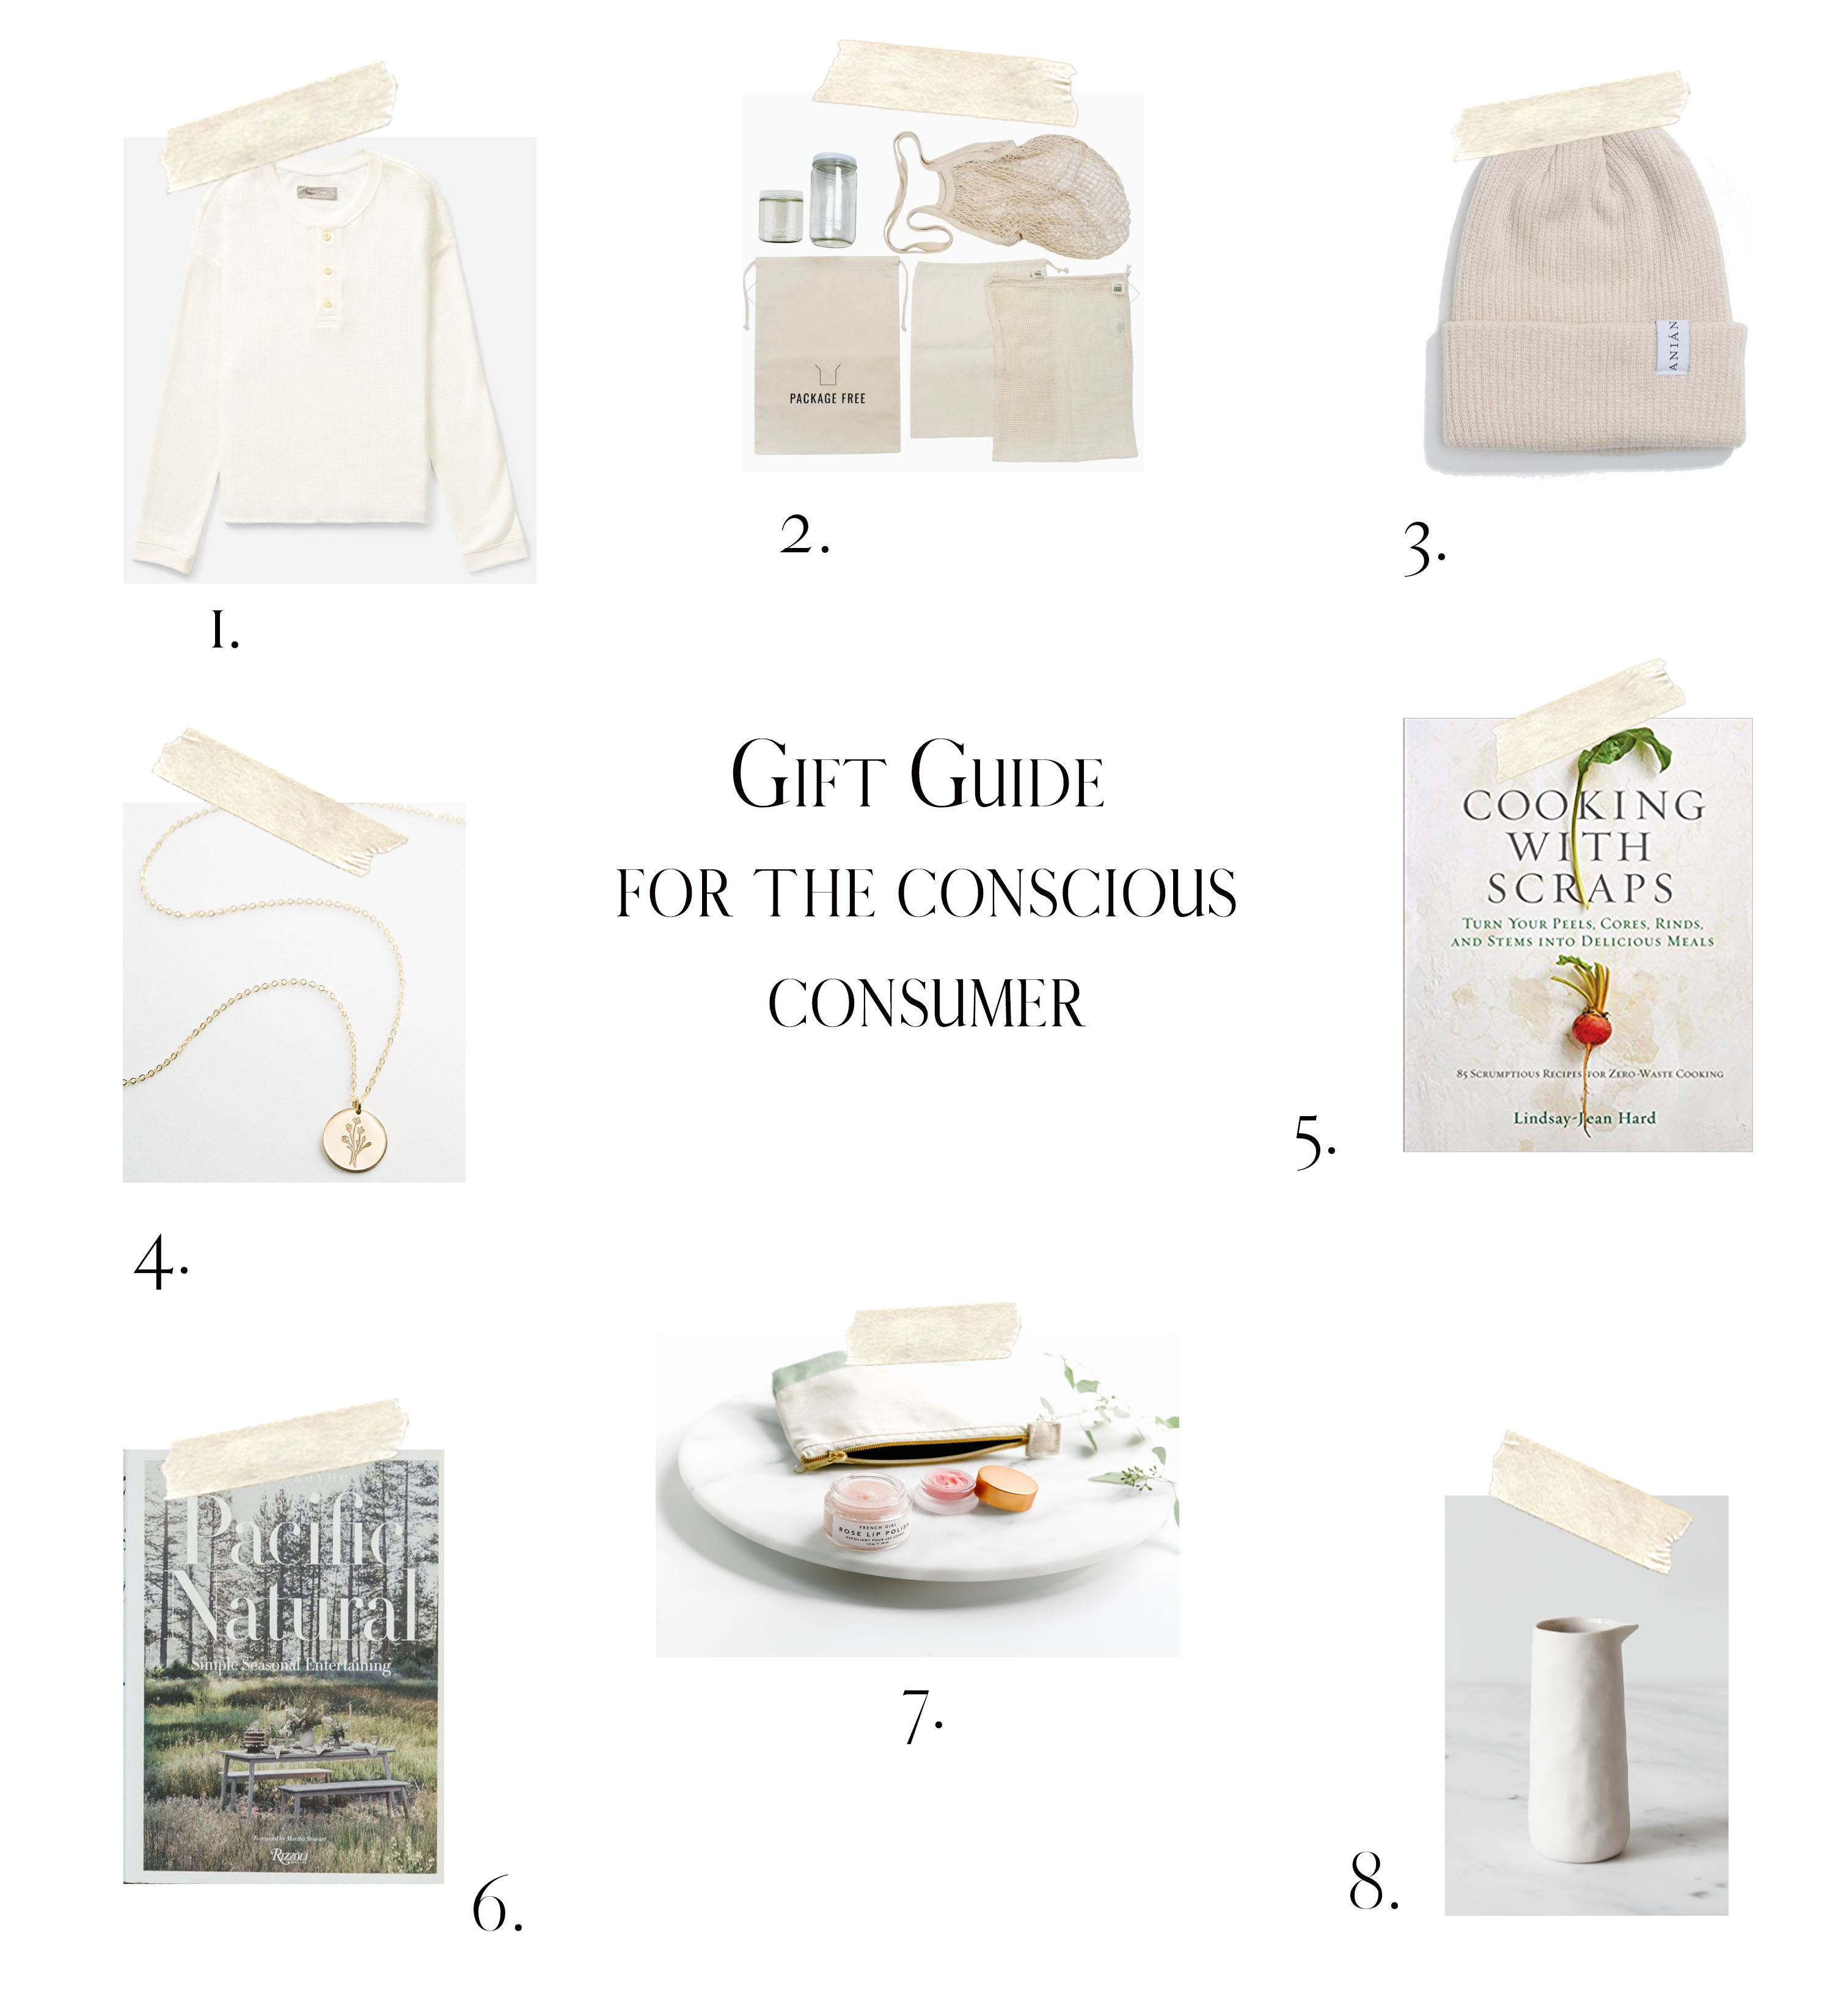 Gift Guide for the Conscious Consumer